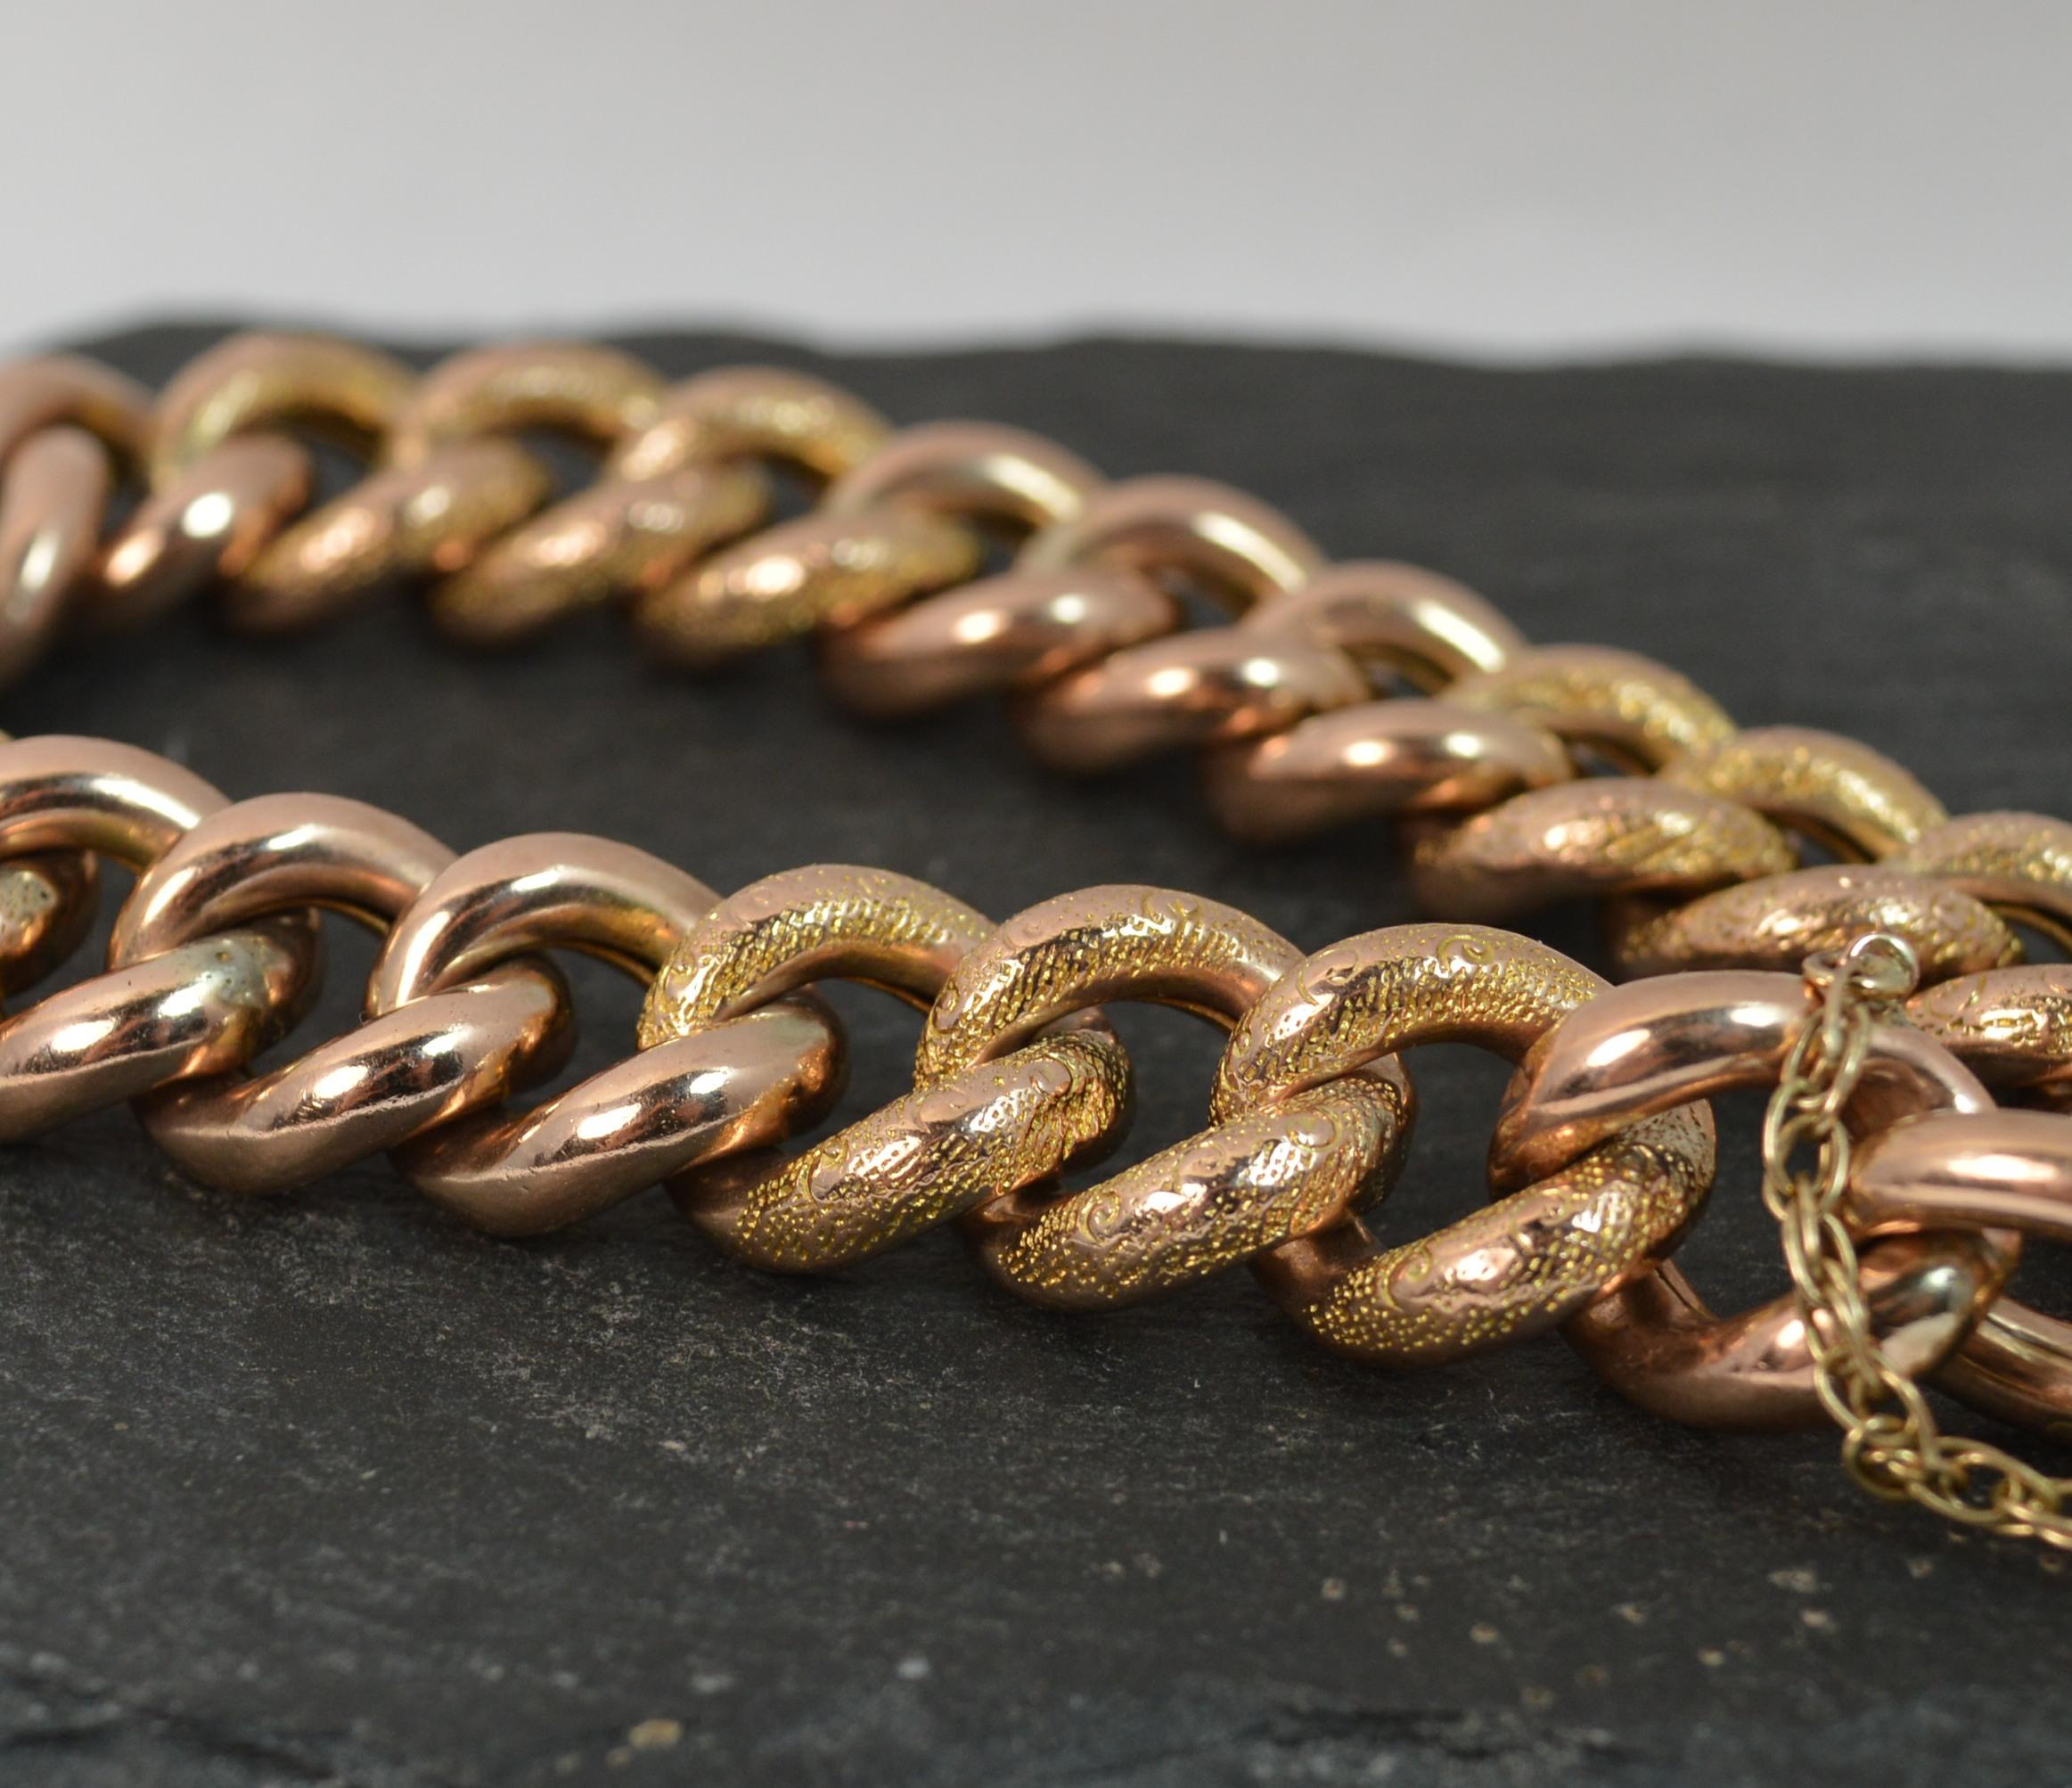 A superb Edwardian period bracelet.
Solid 9 carat rose gold piece.
Padlock clasp design.
​Curb shaped links with alternating plain and chased engraved sections.

CONDITION ; Good for age. Working padlock clasp and with safety chain. Crisp links.